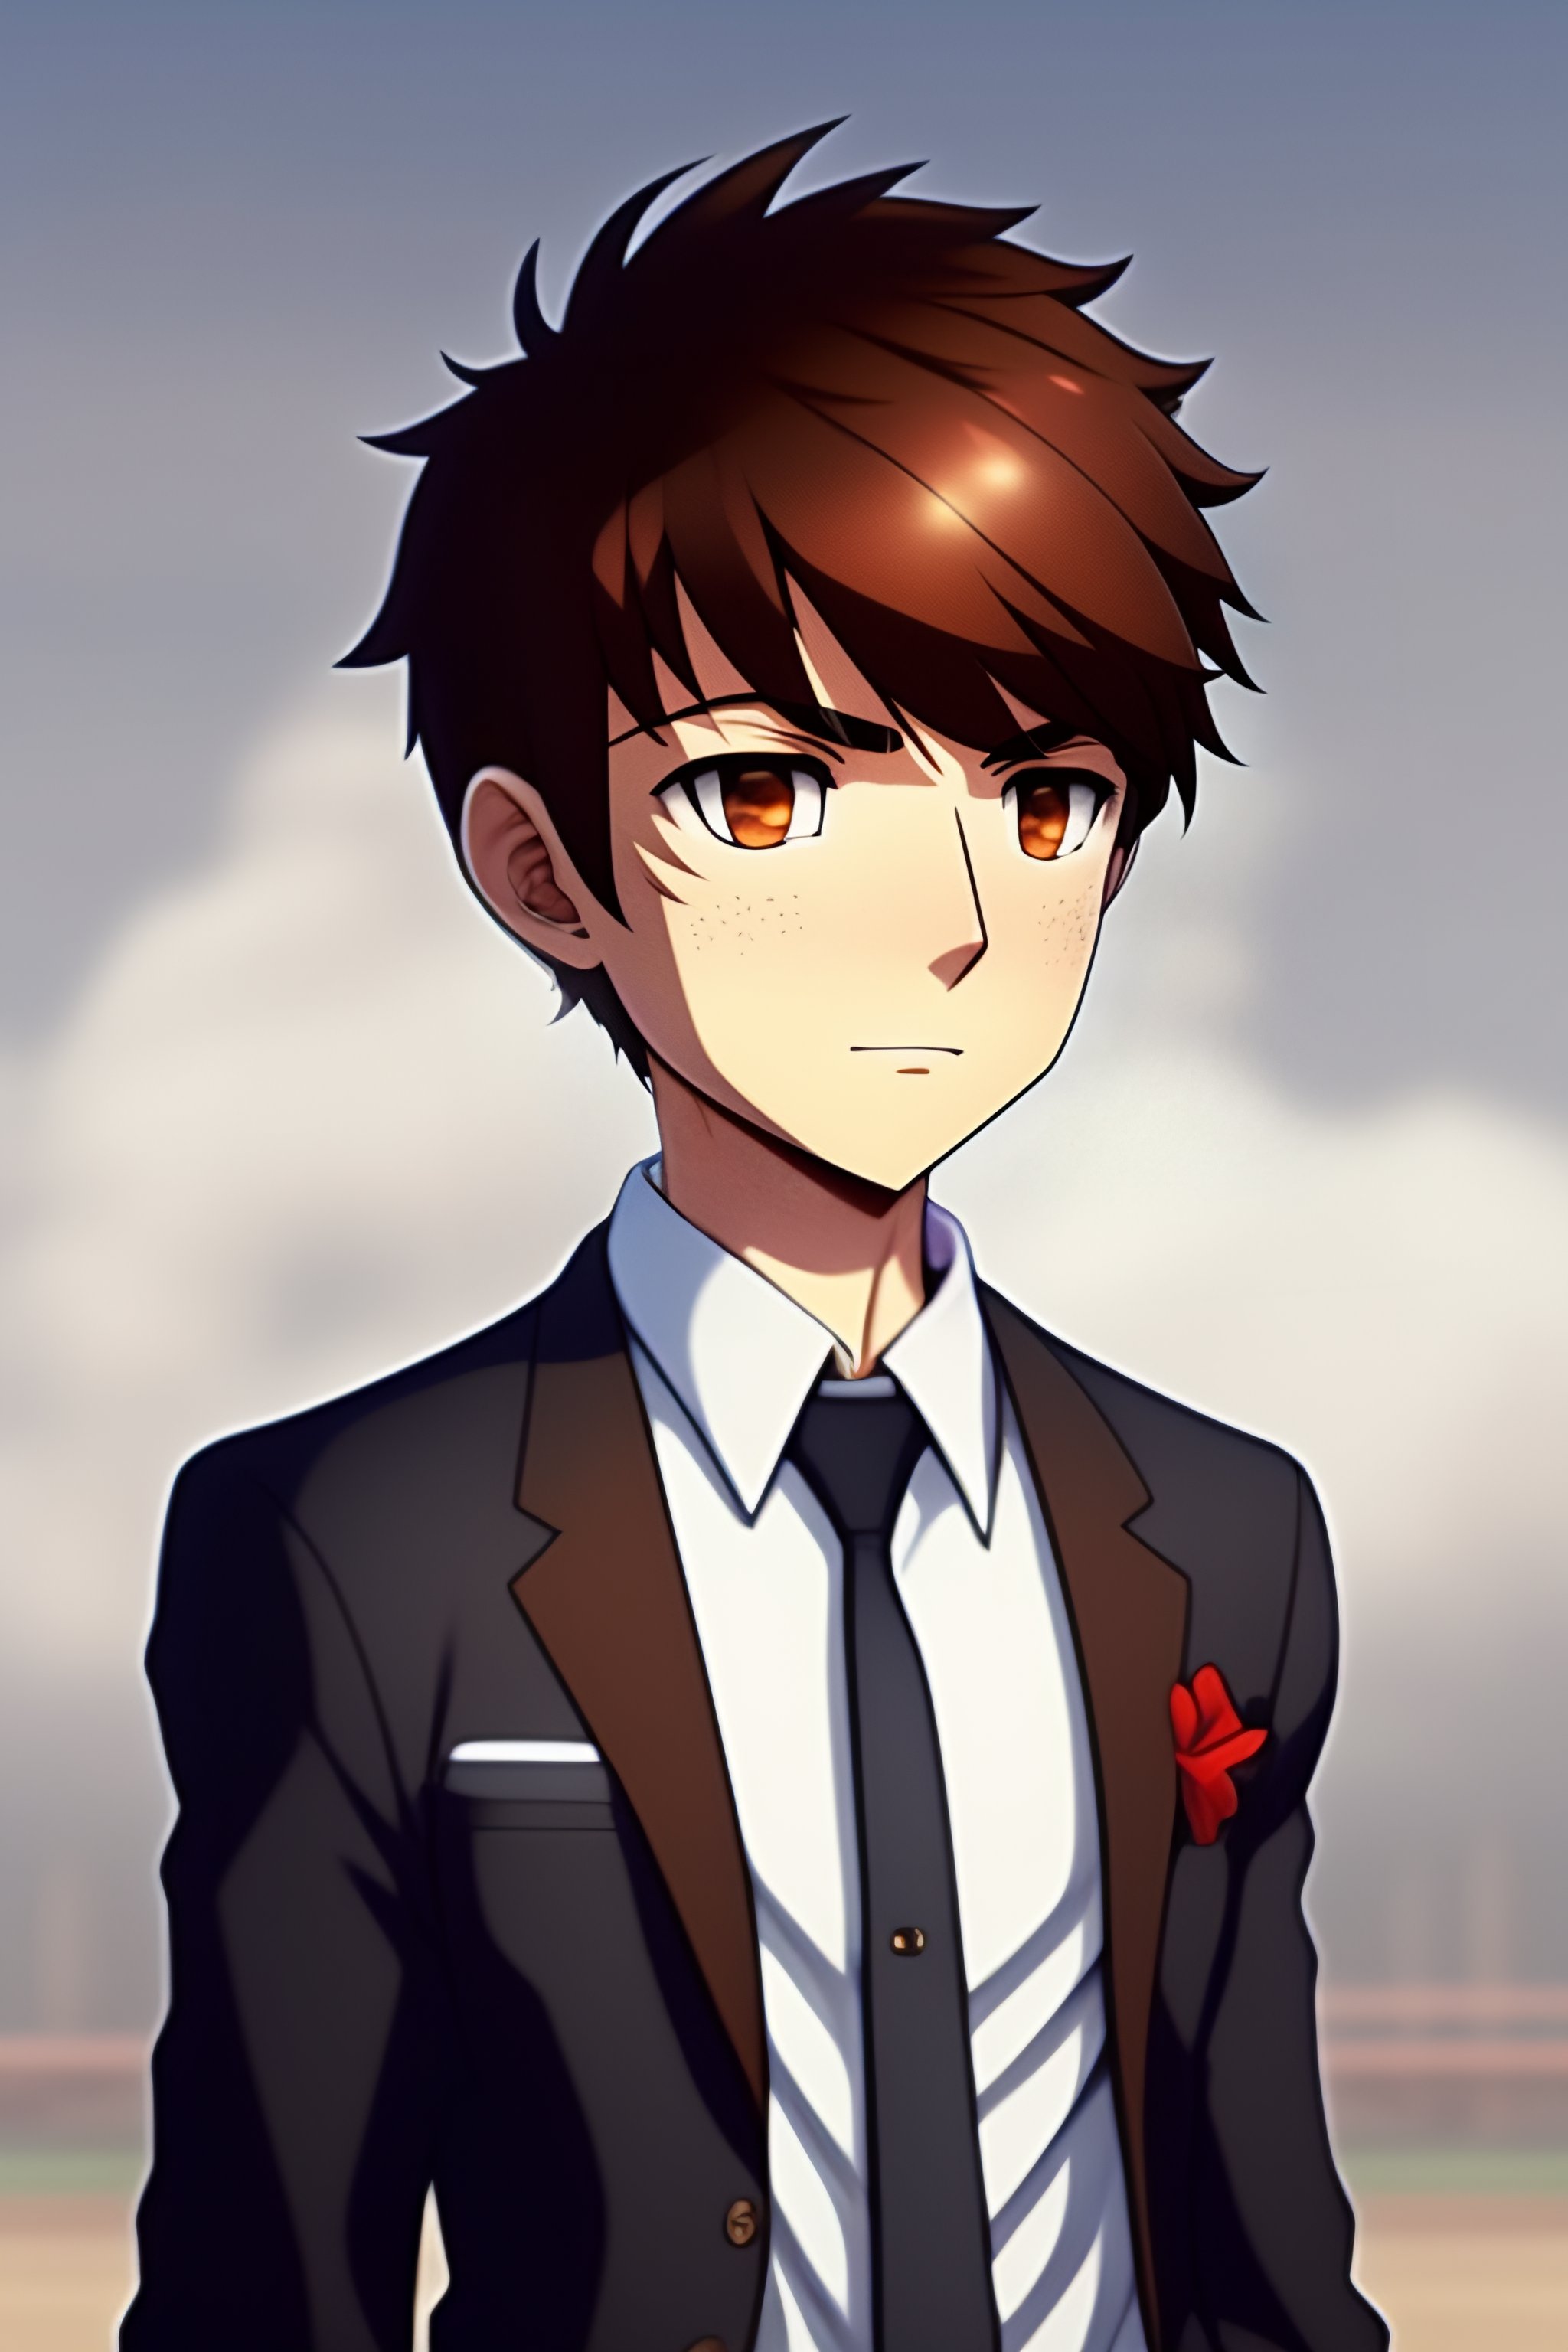 Lexica - Anime boy with brown hair, 12 year old.